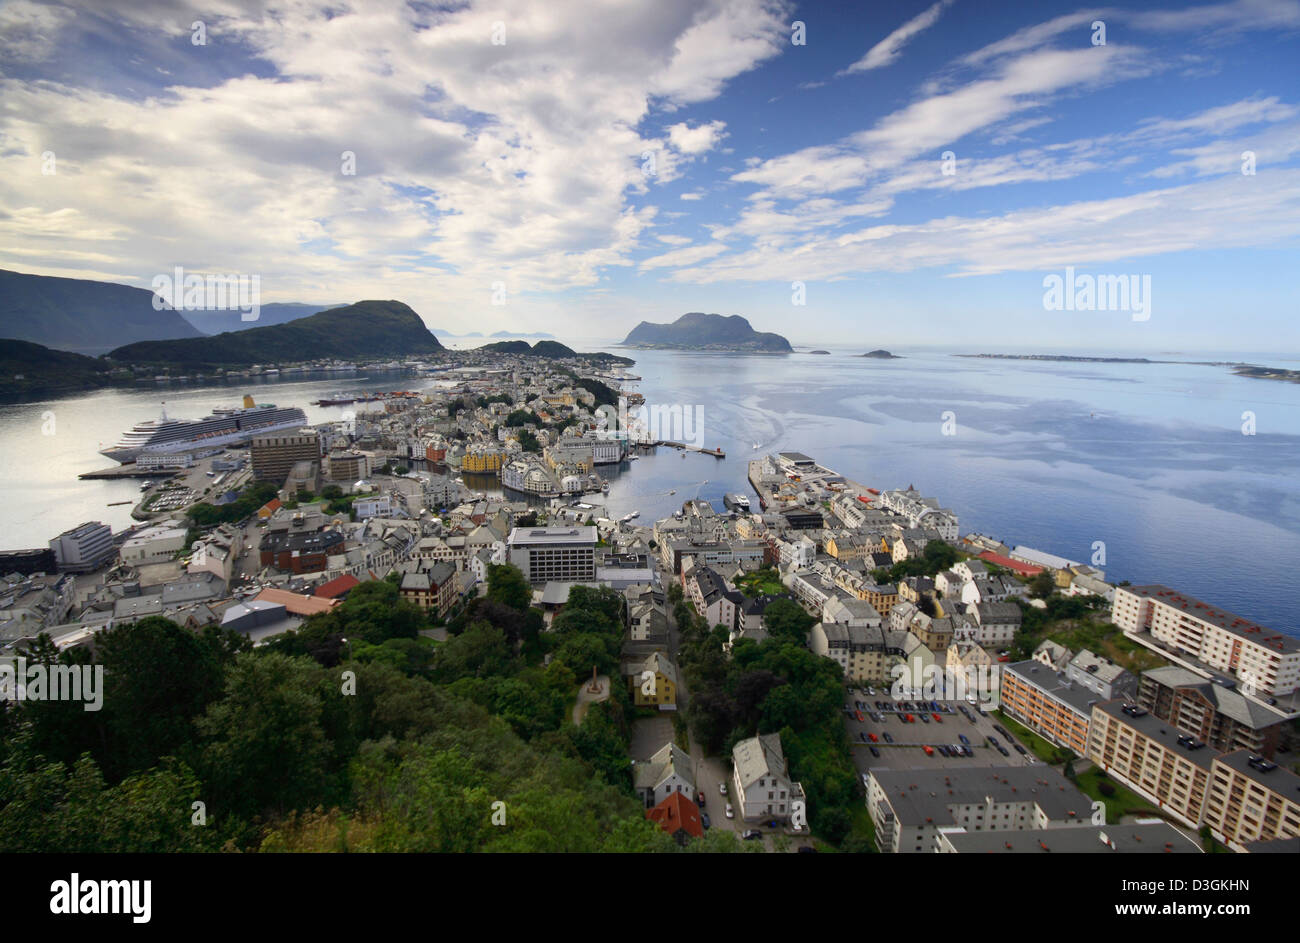 Aerial view over the beautiful city of Alesund on the Norwegian coast. Stock Photo